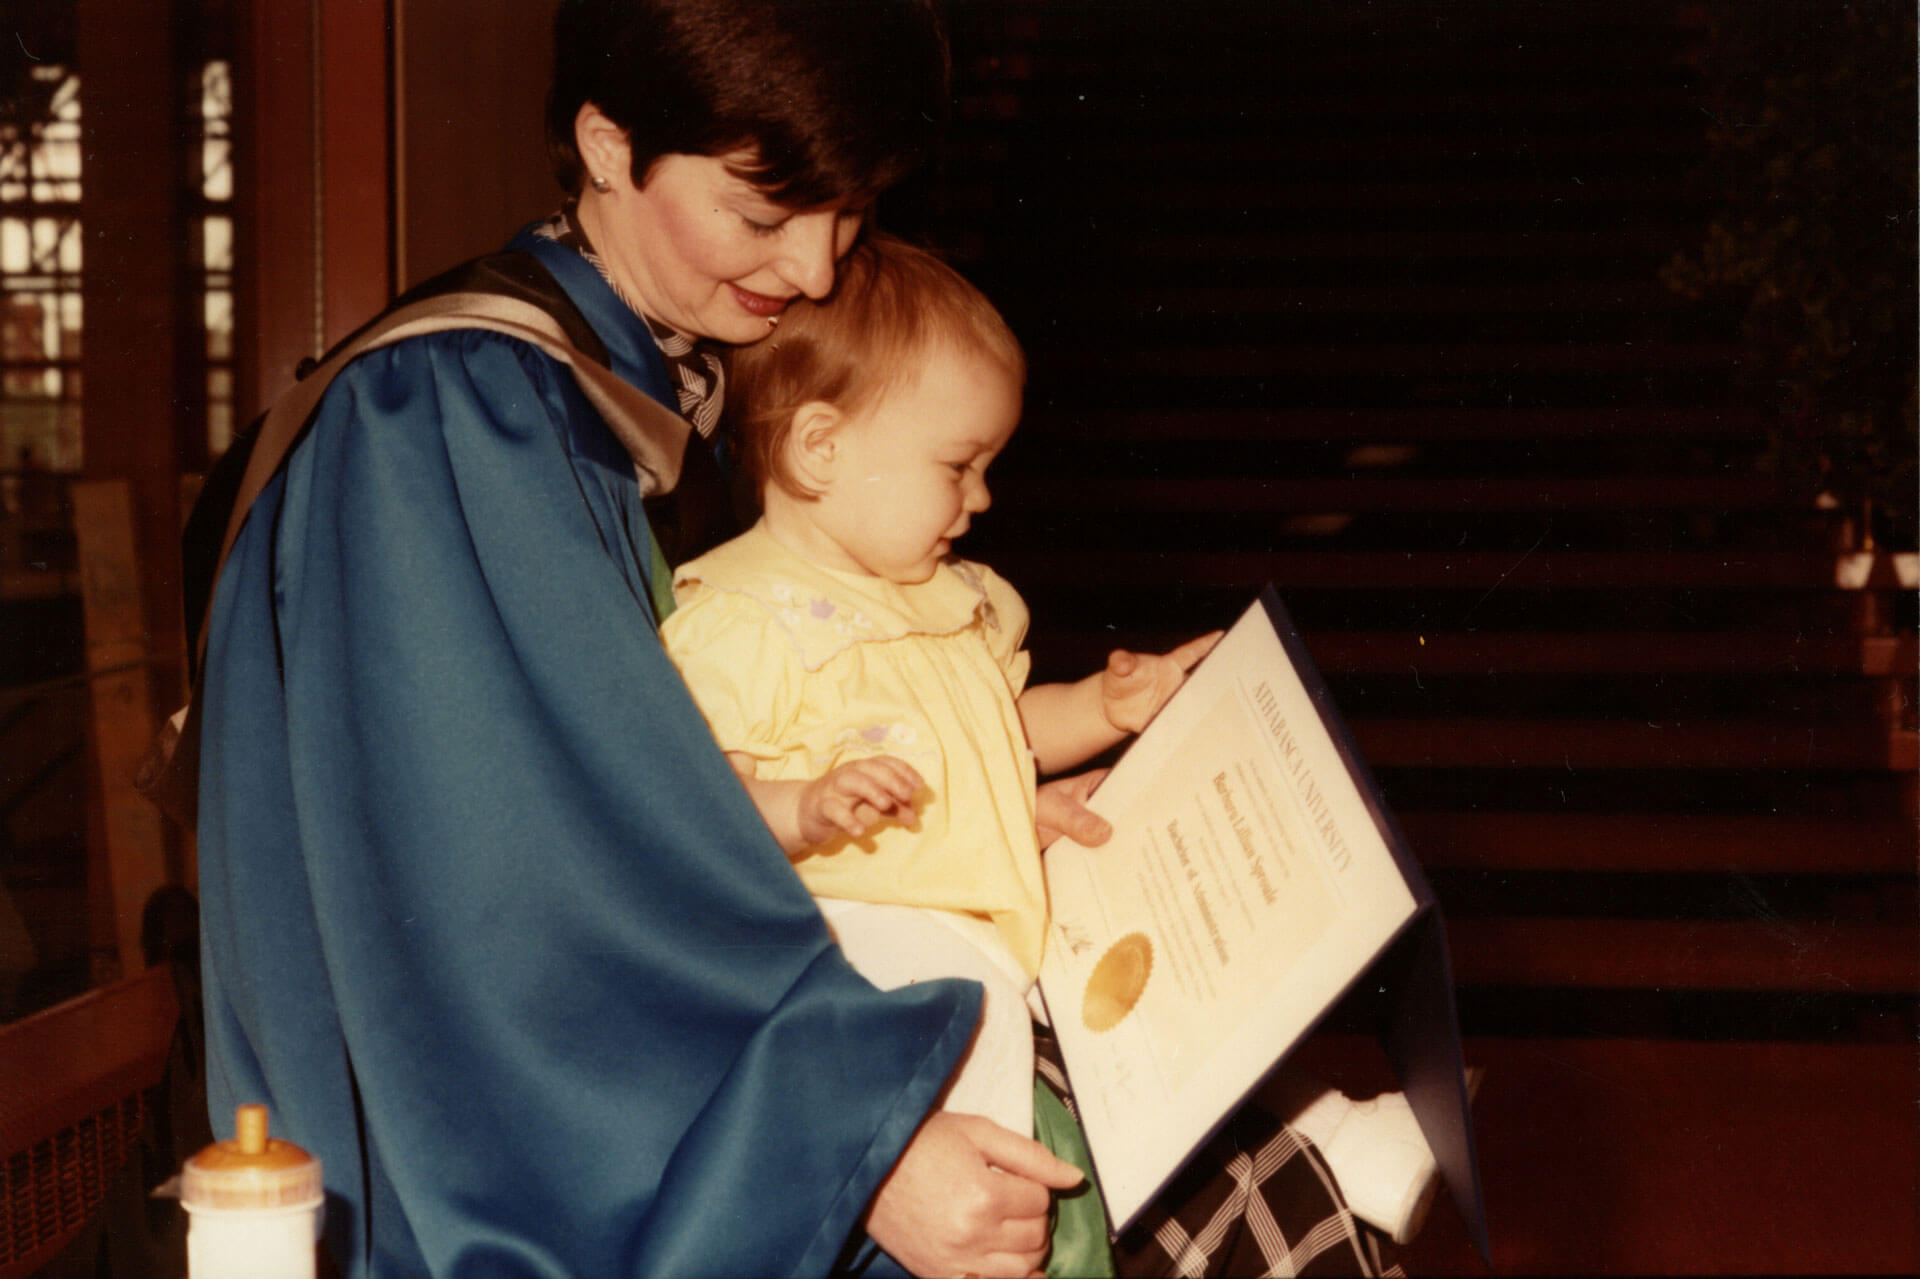 A graduate, presumably a mother, holds a baby and a degree parchment following convocation ceremonies circa 1984